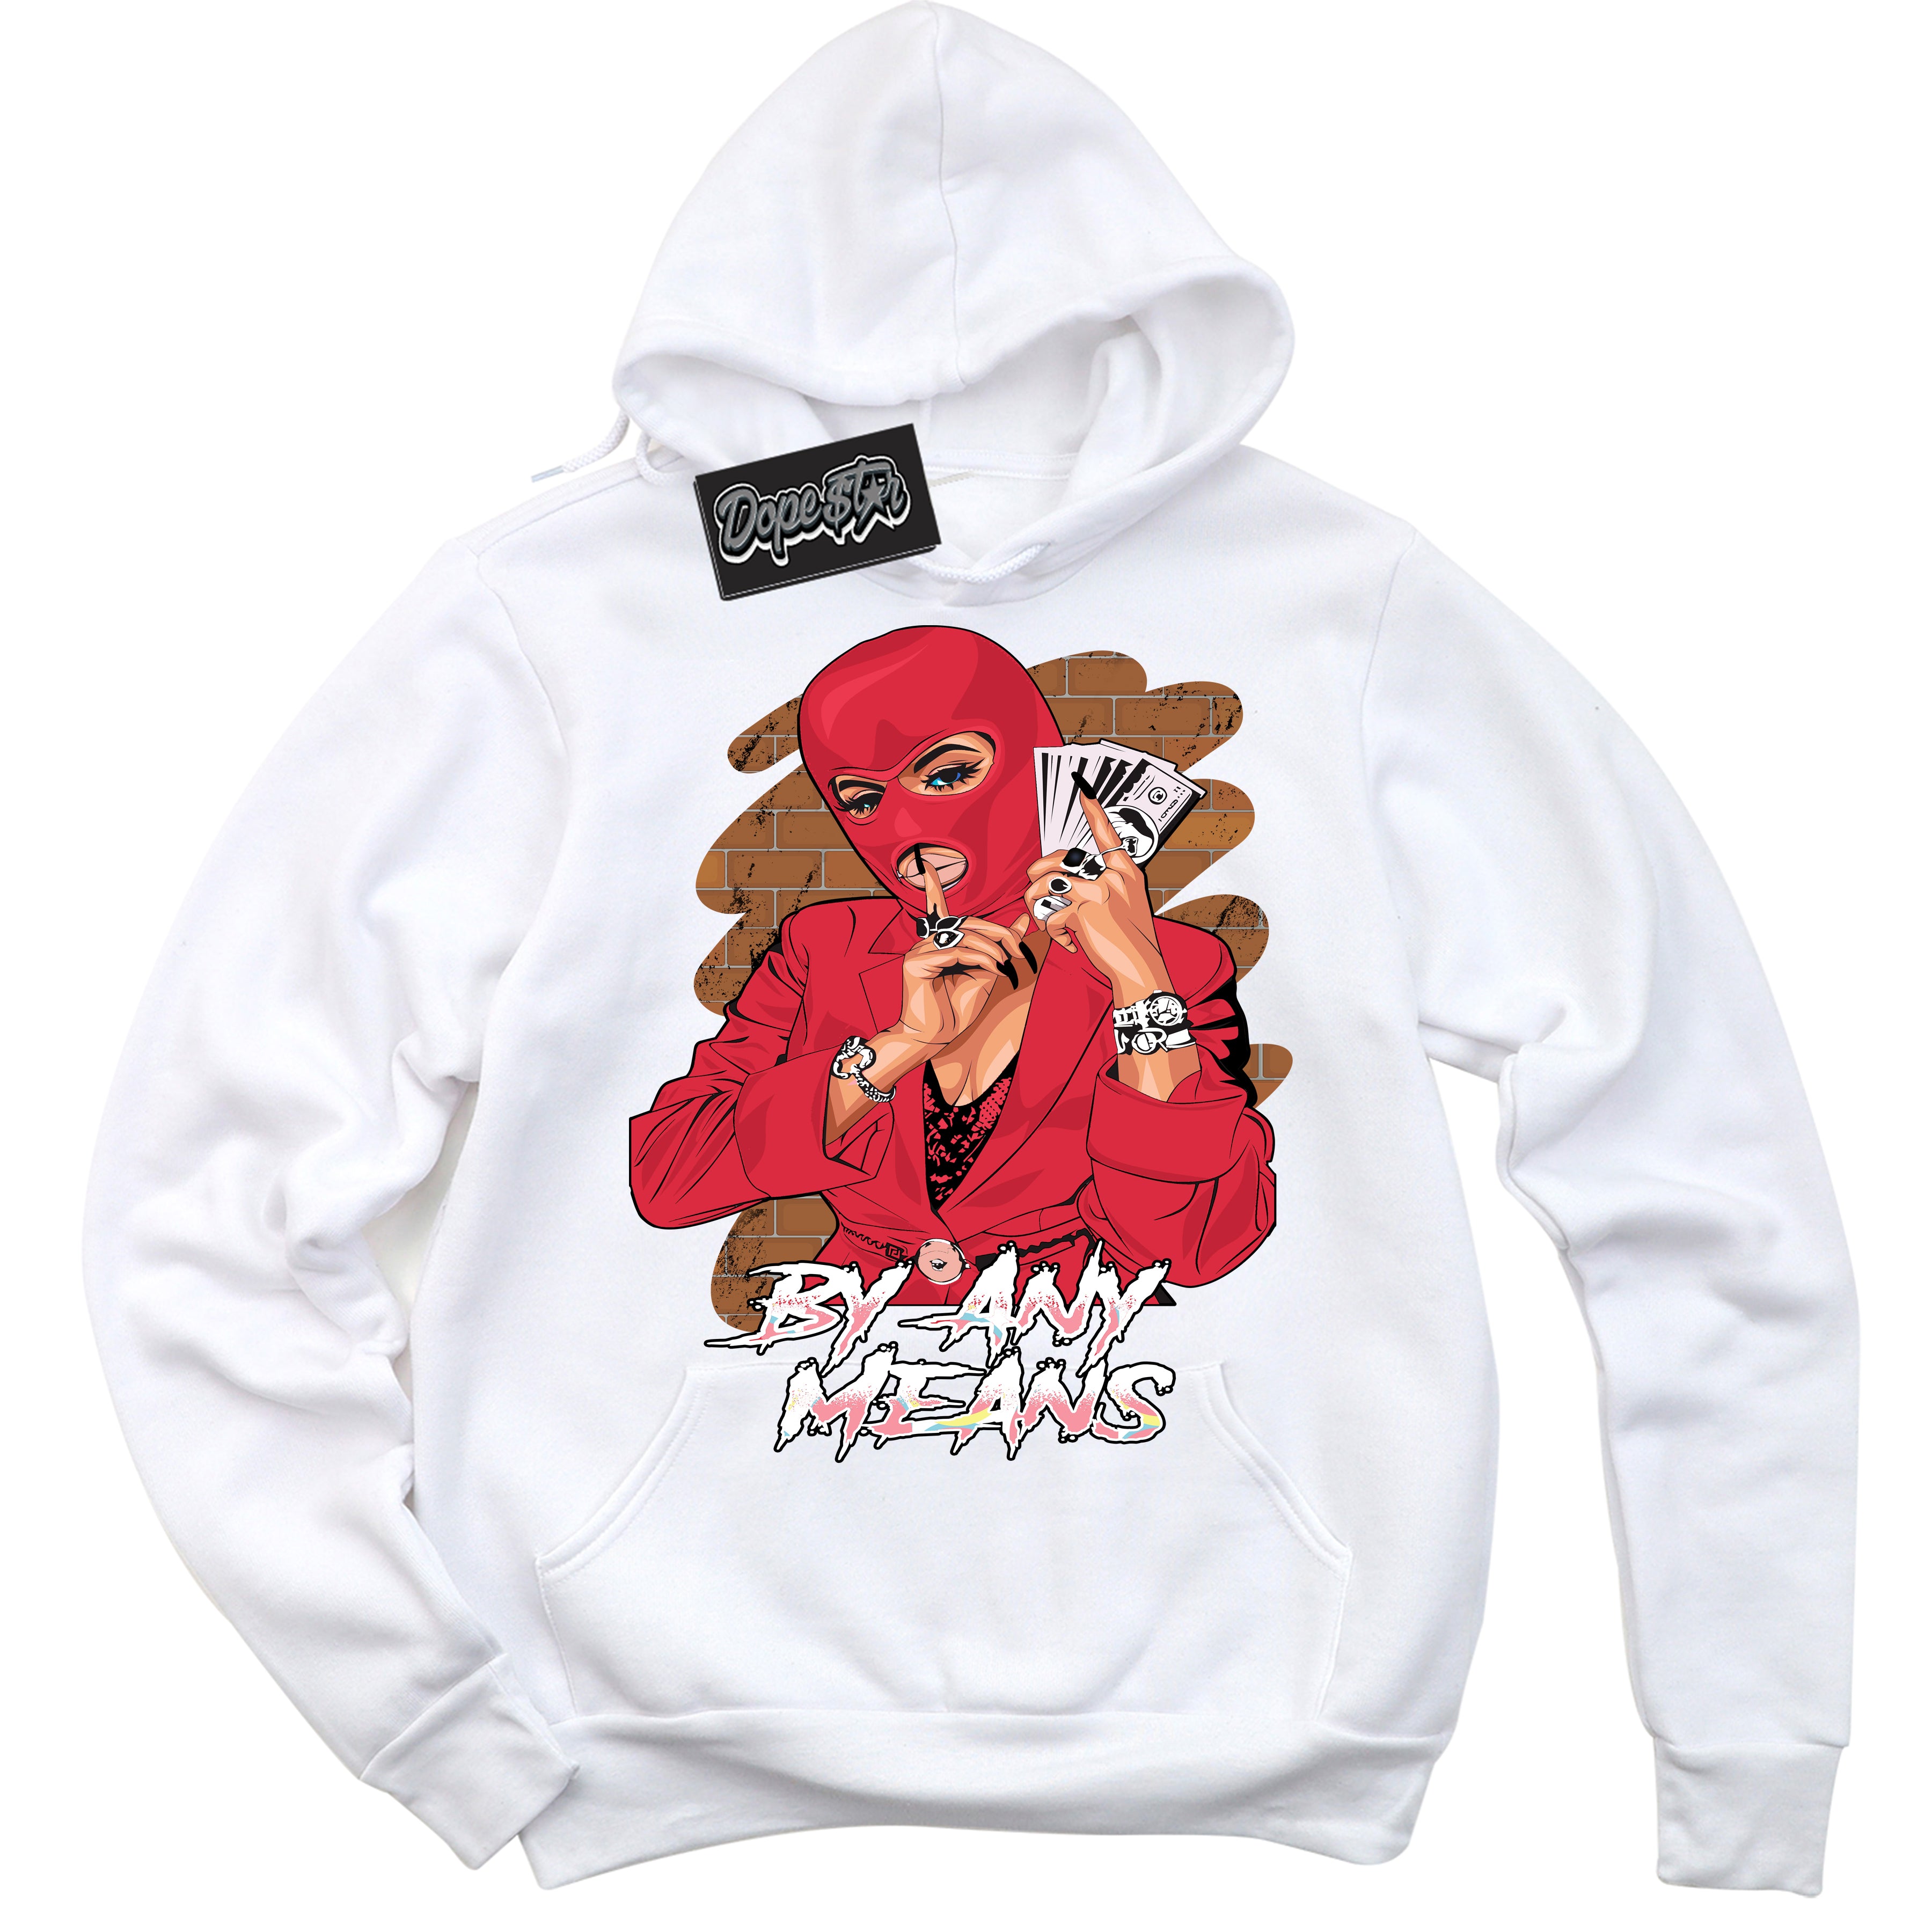 Cool White Graphic DopeStar Hoodie with “ By Any Means “ print, that perfectly matches Spider-Verse 1s sneakers